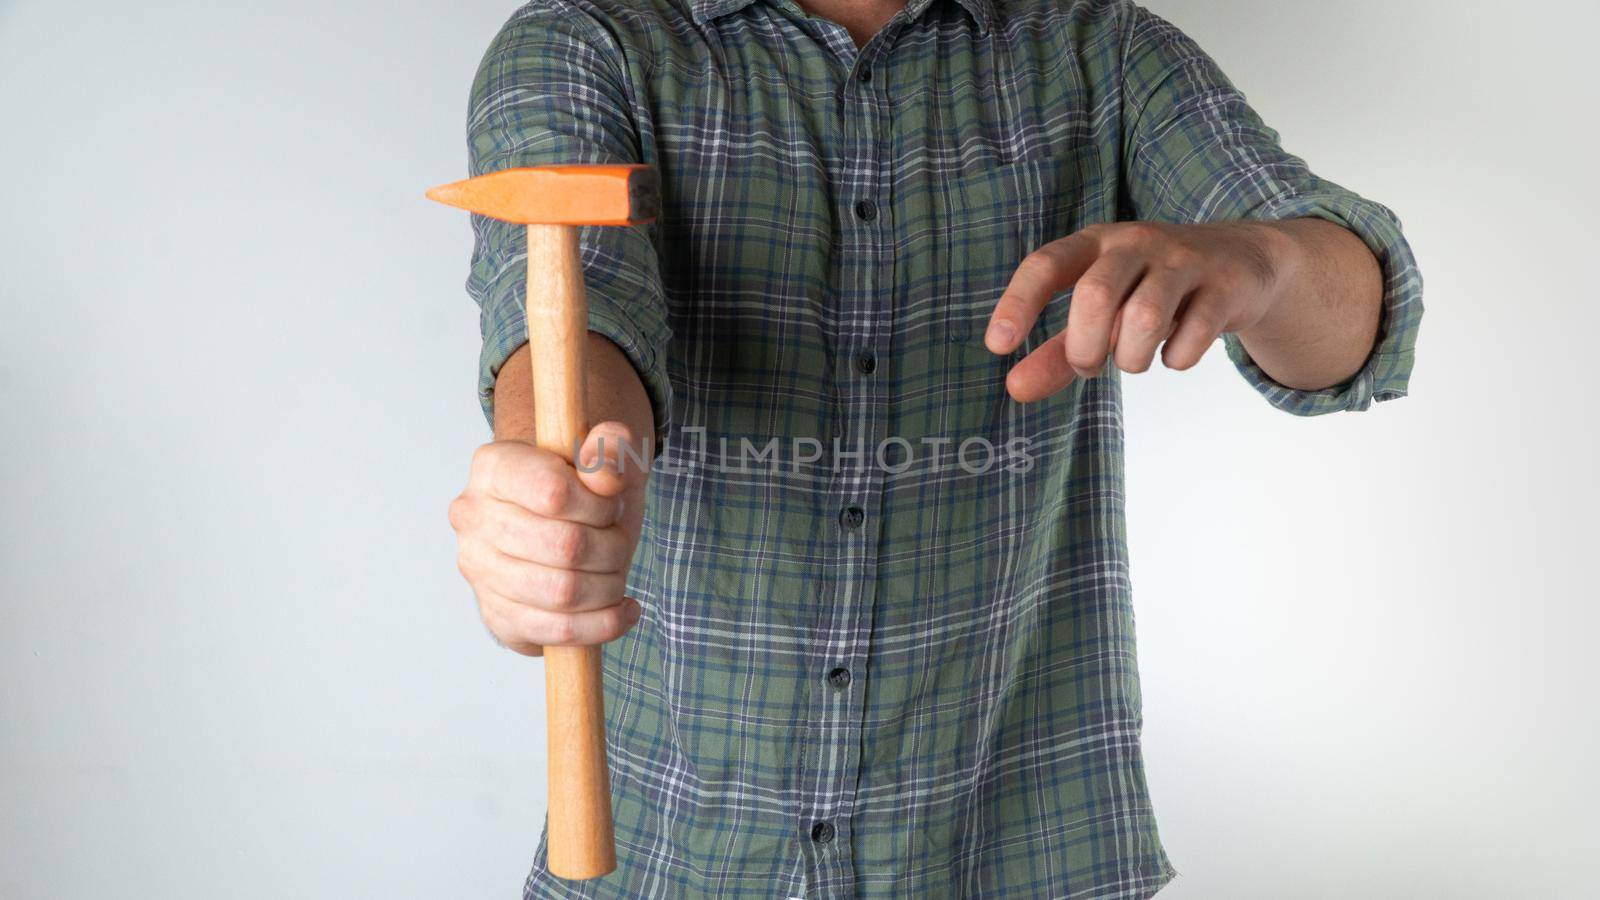 A man holds a hammer in his hand - home repairs. High quality photo